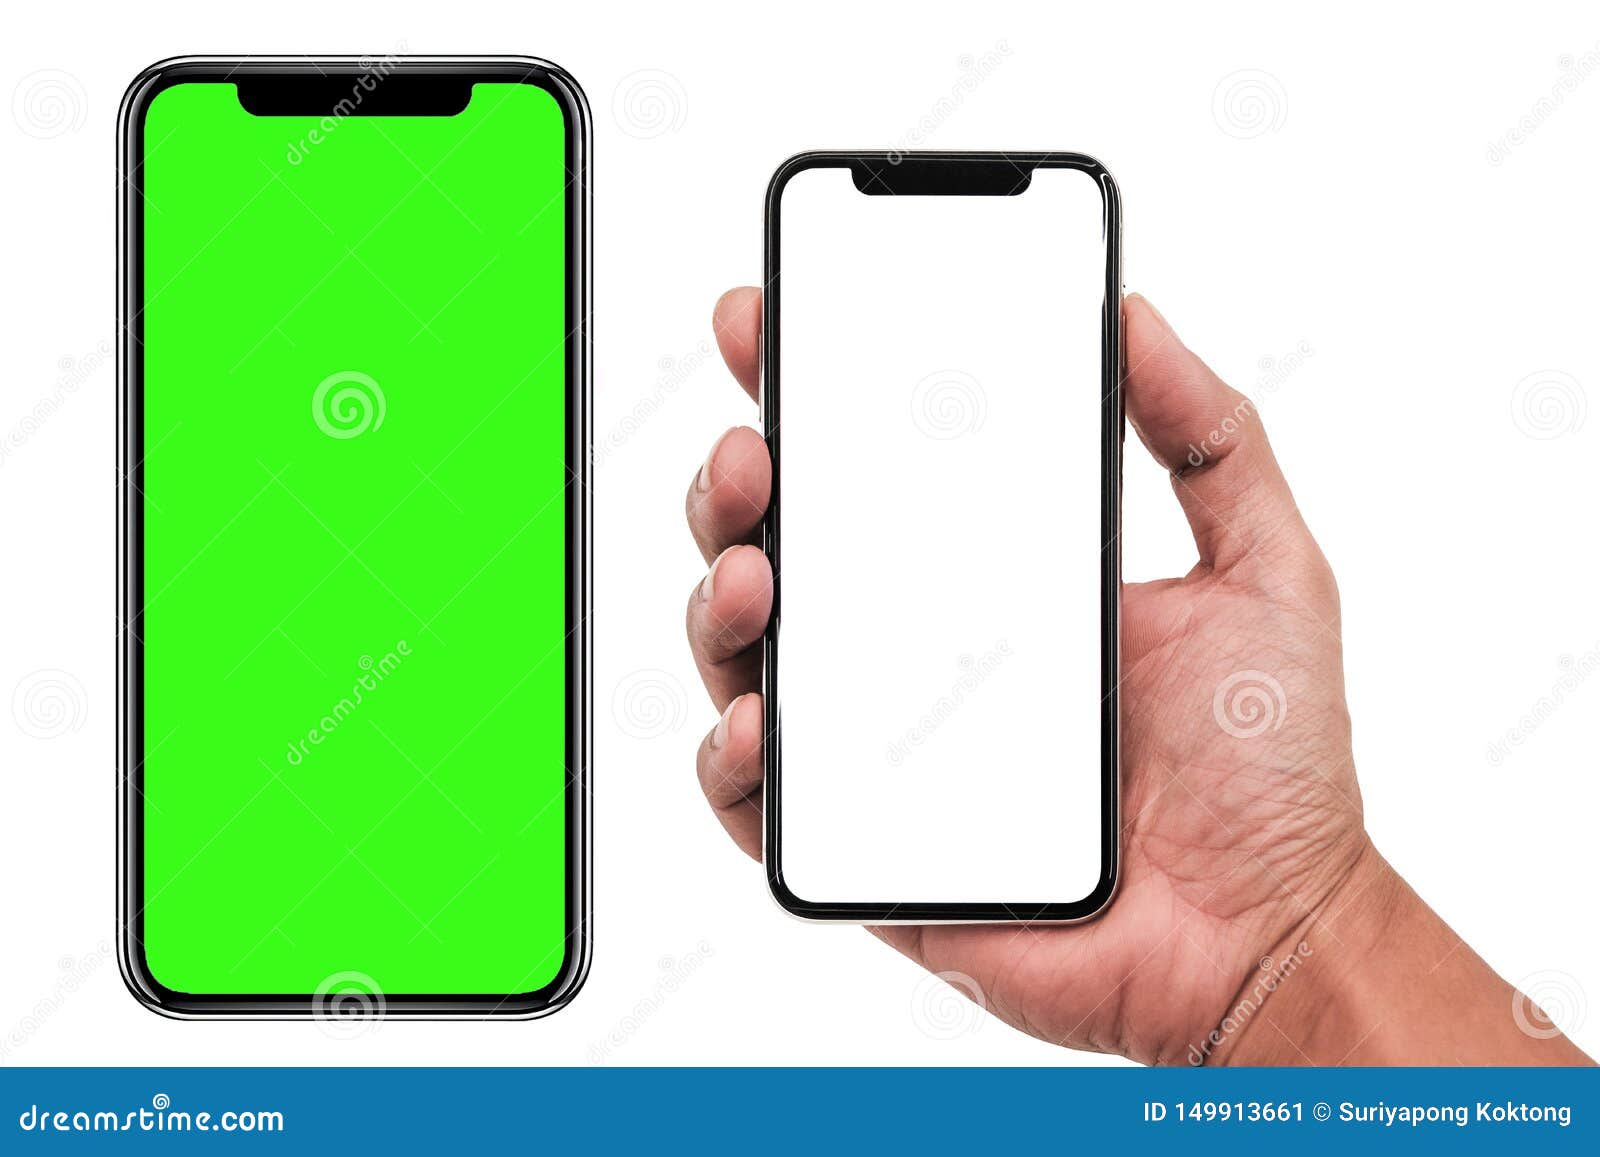 smartphone similar to iphone xs max with blank white screen for infographic global business marketing plan , mockup model similar